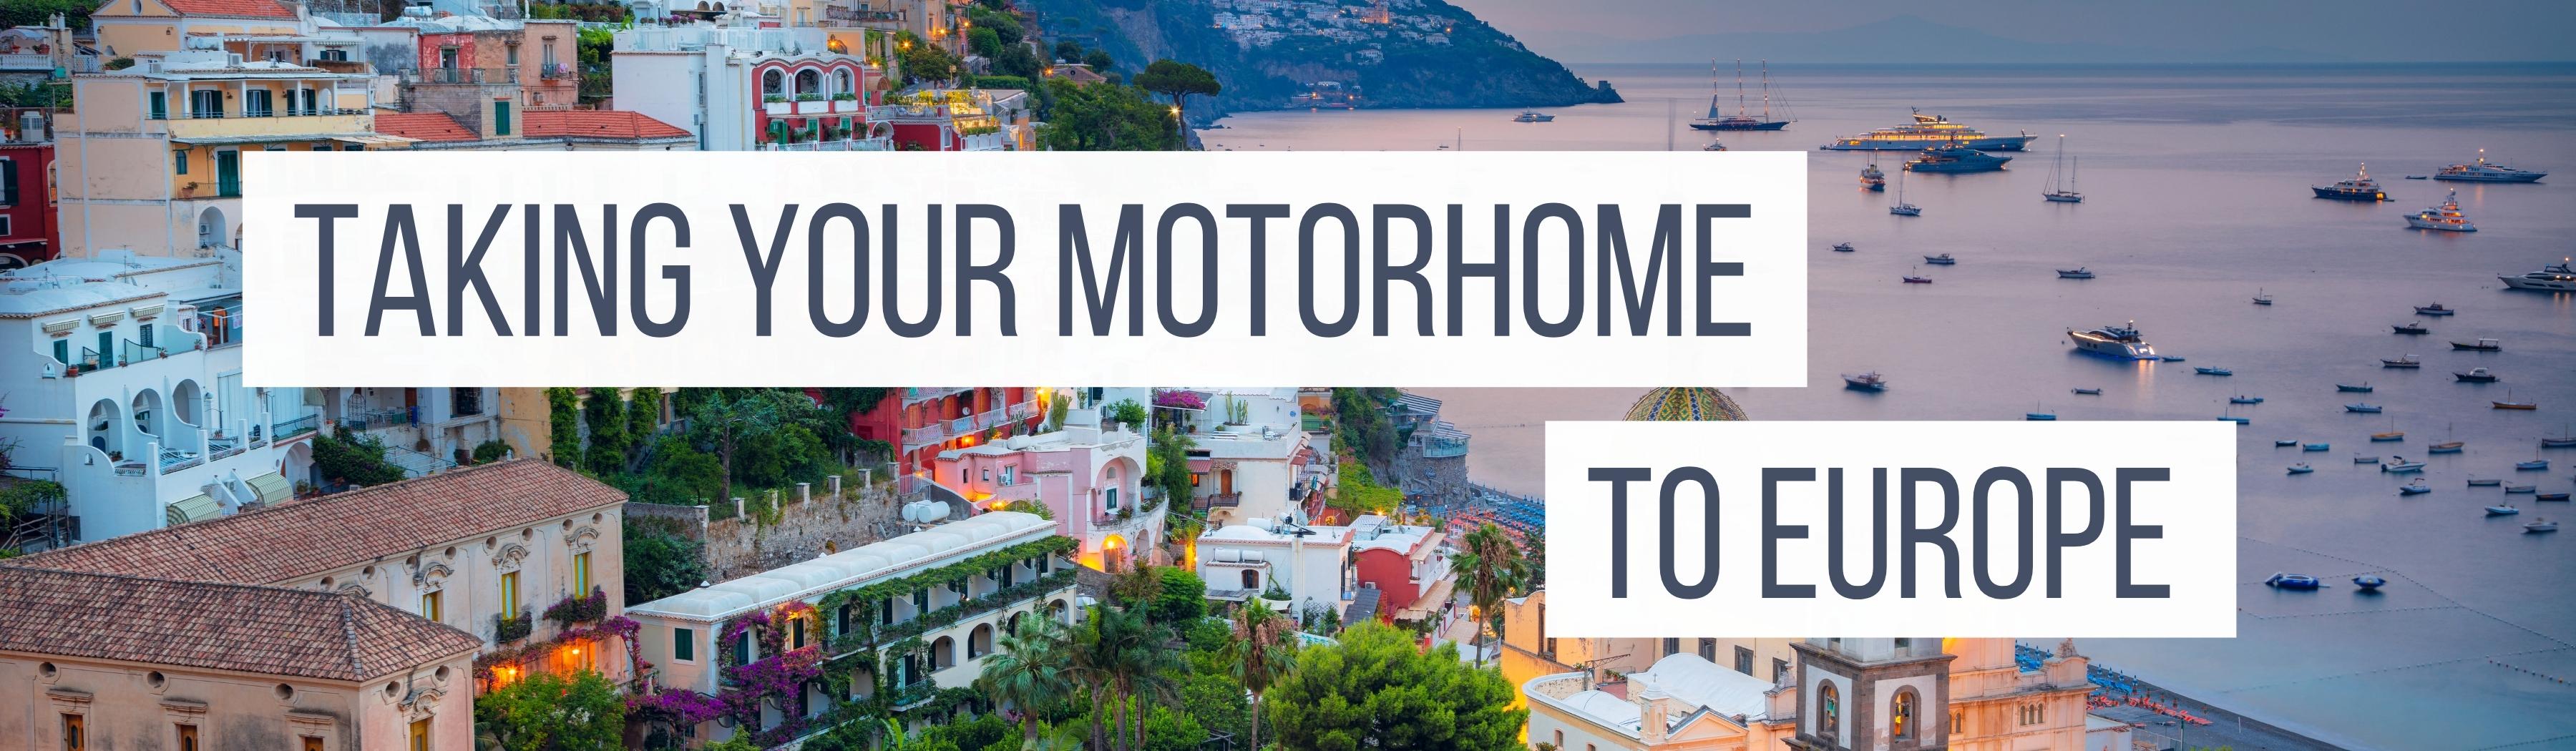 A view of pretty buildings overlooking the sea in a European country. Taking your motorhome to Europe by Webbs.